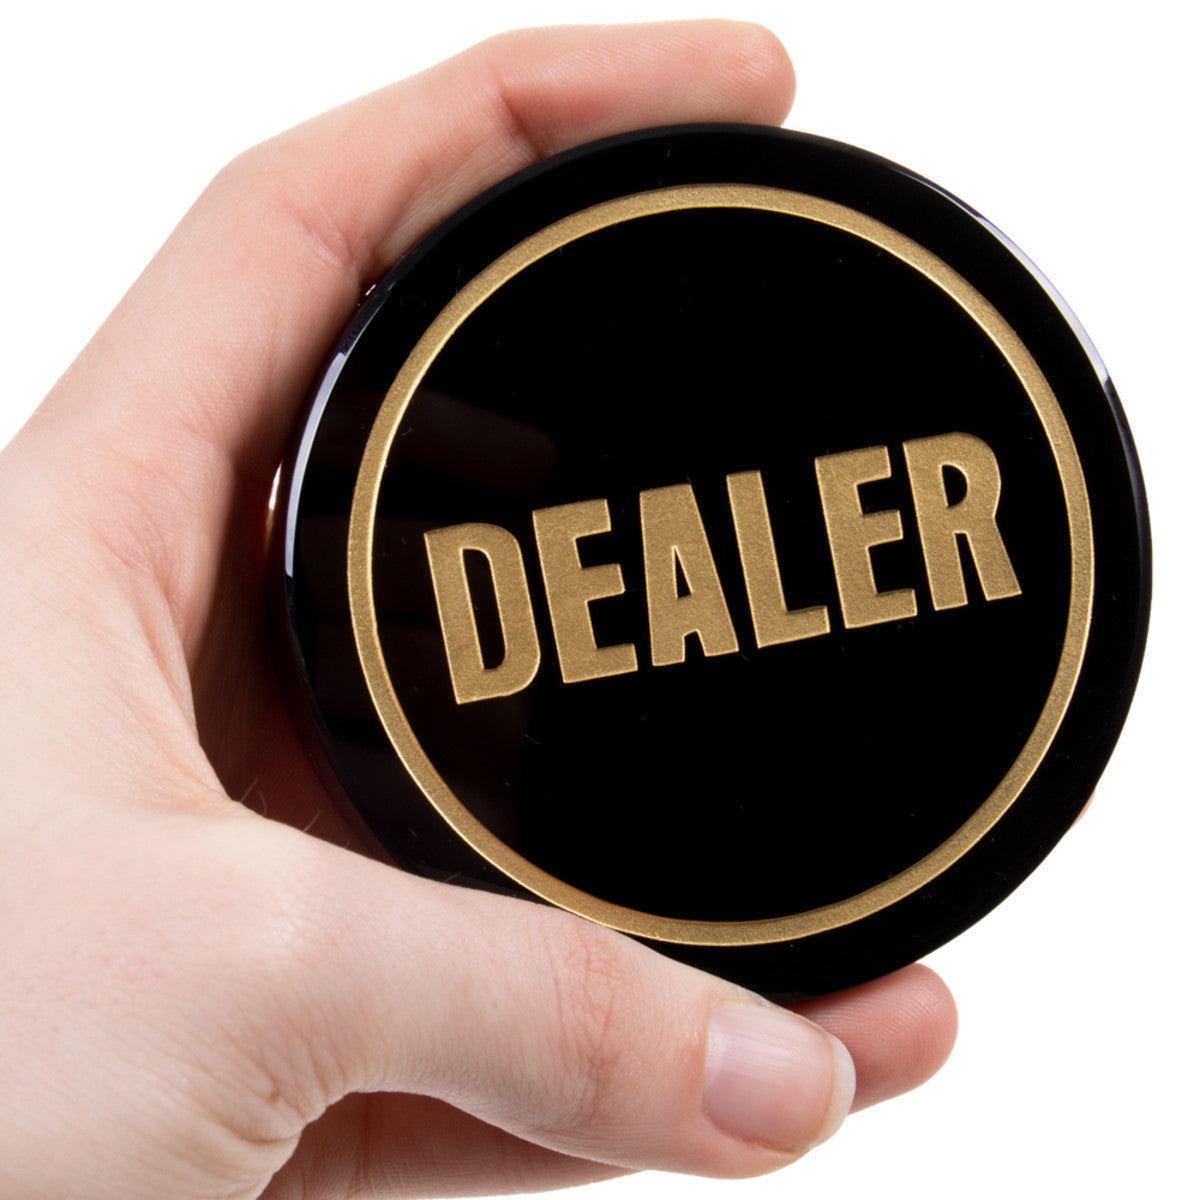 Black and Gold Dealer Button